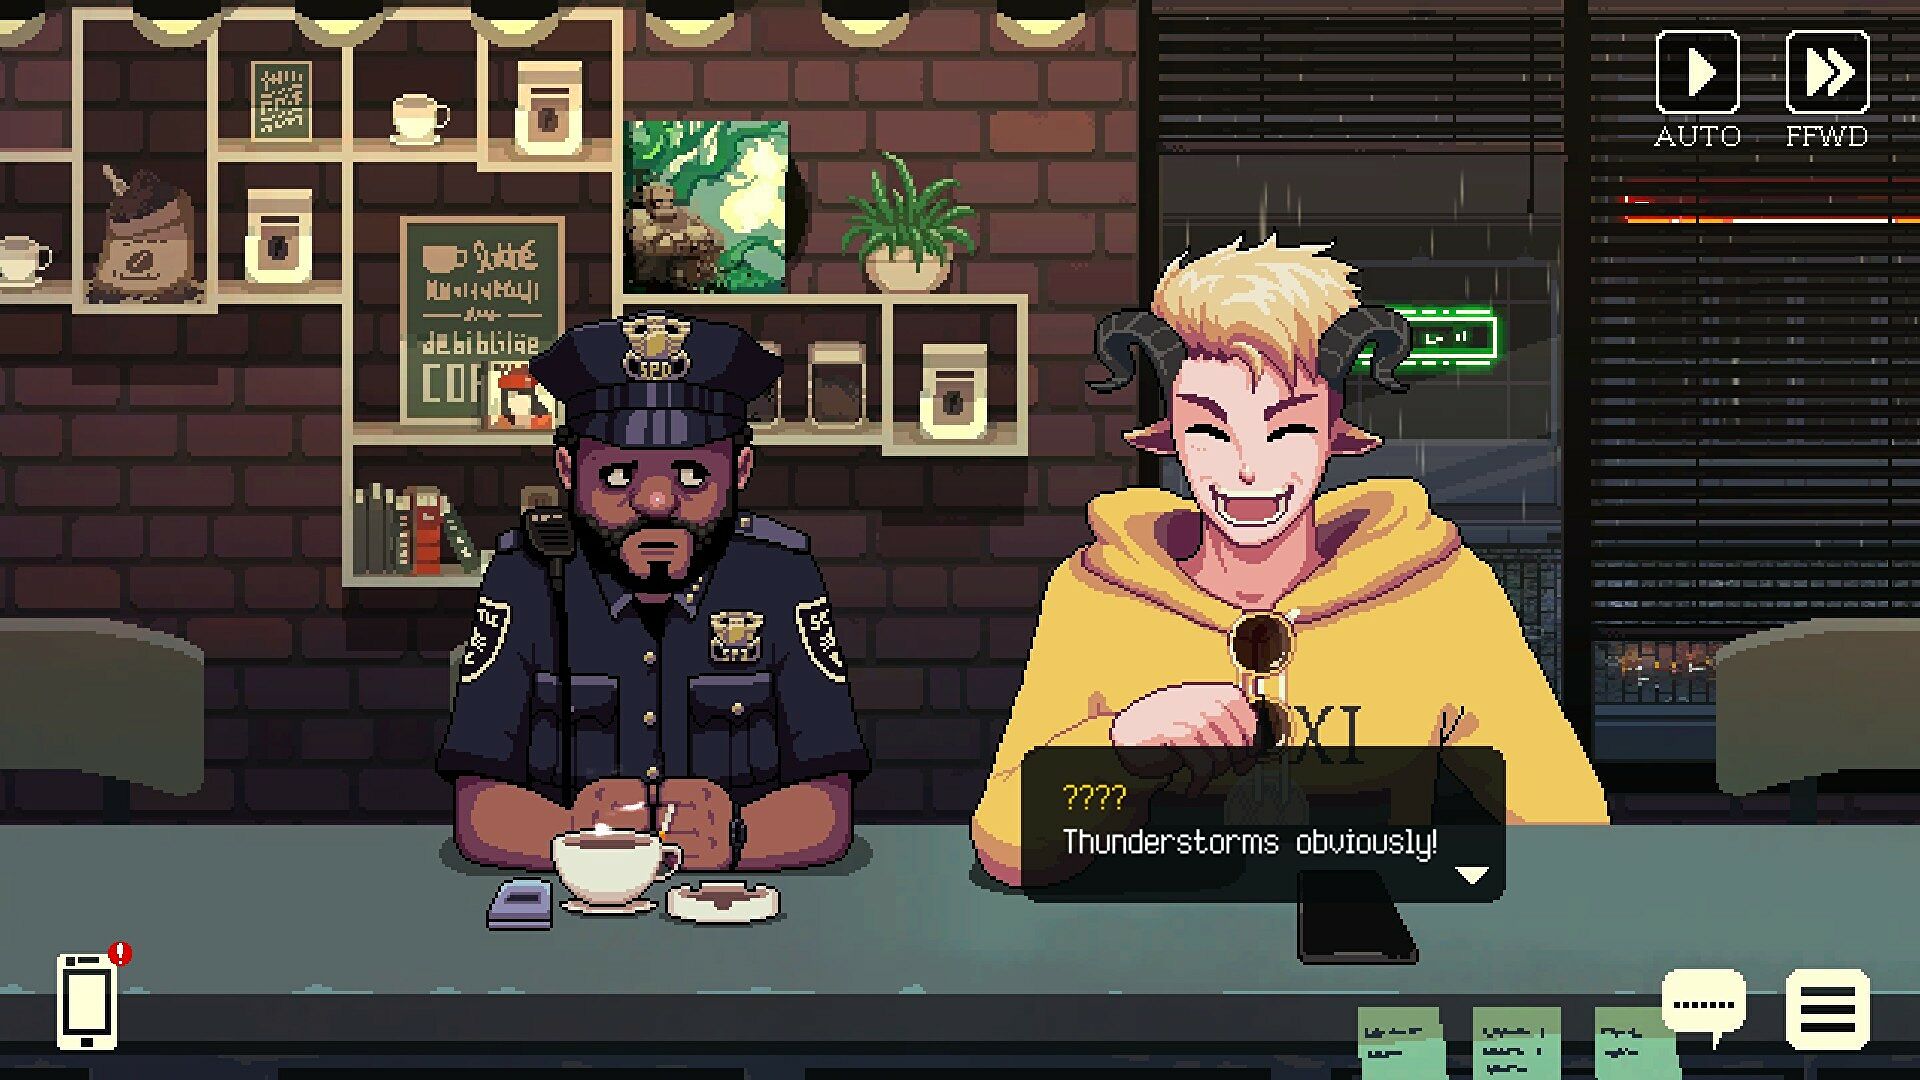 Coffee Talk Episode 2 will be available from Game Pass on day one